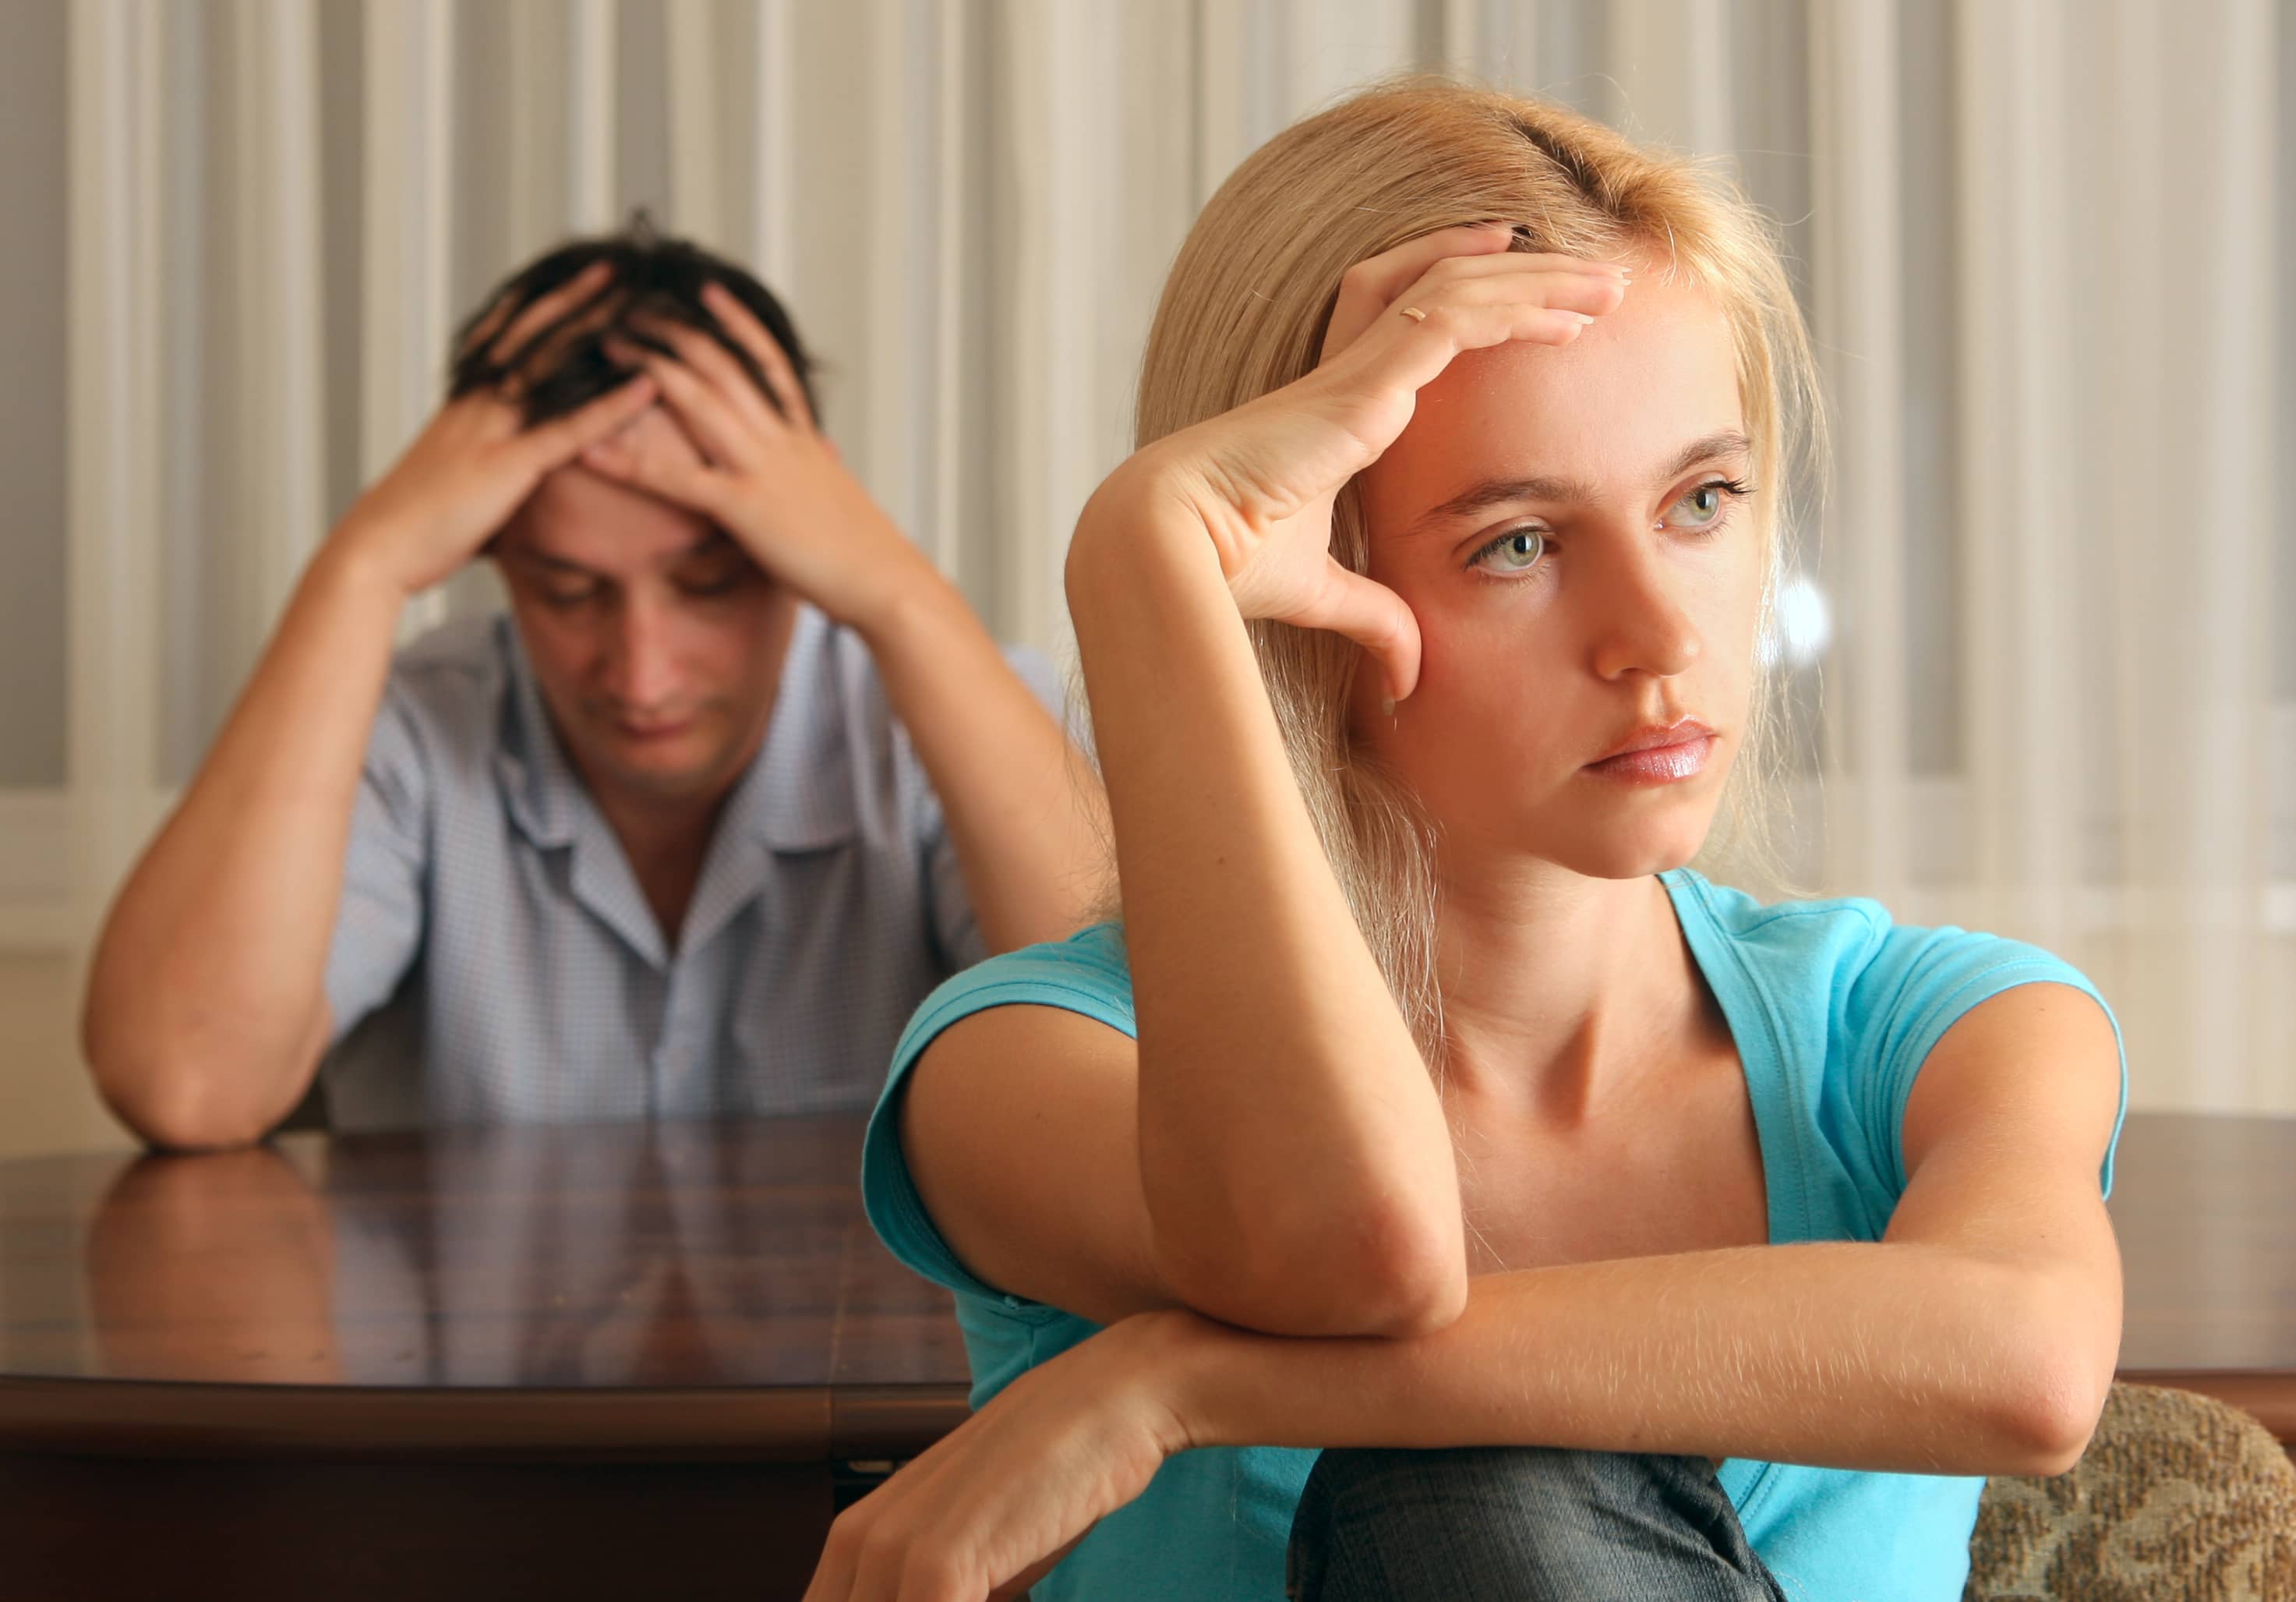 5 Relationship Tips to Help Survive Stressful Times